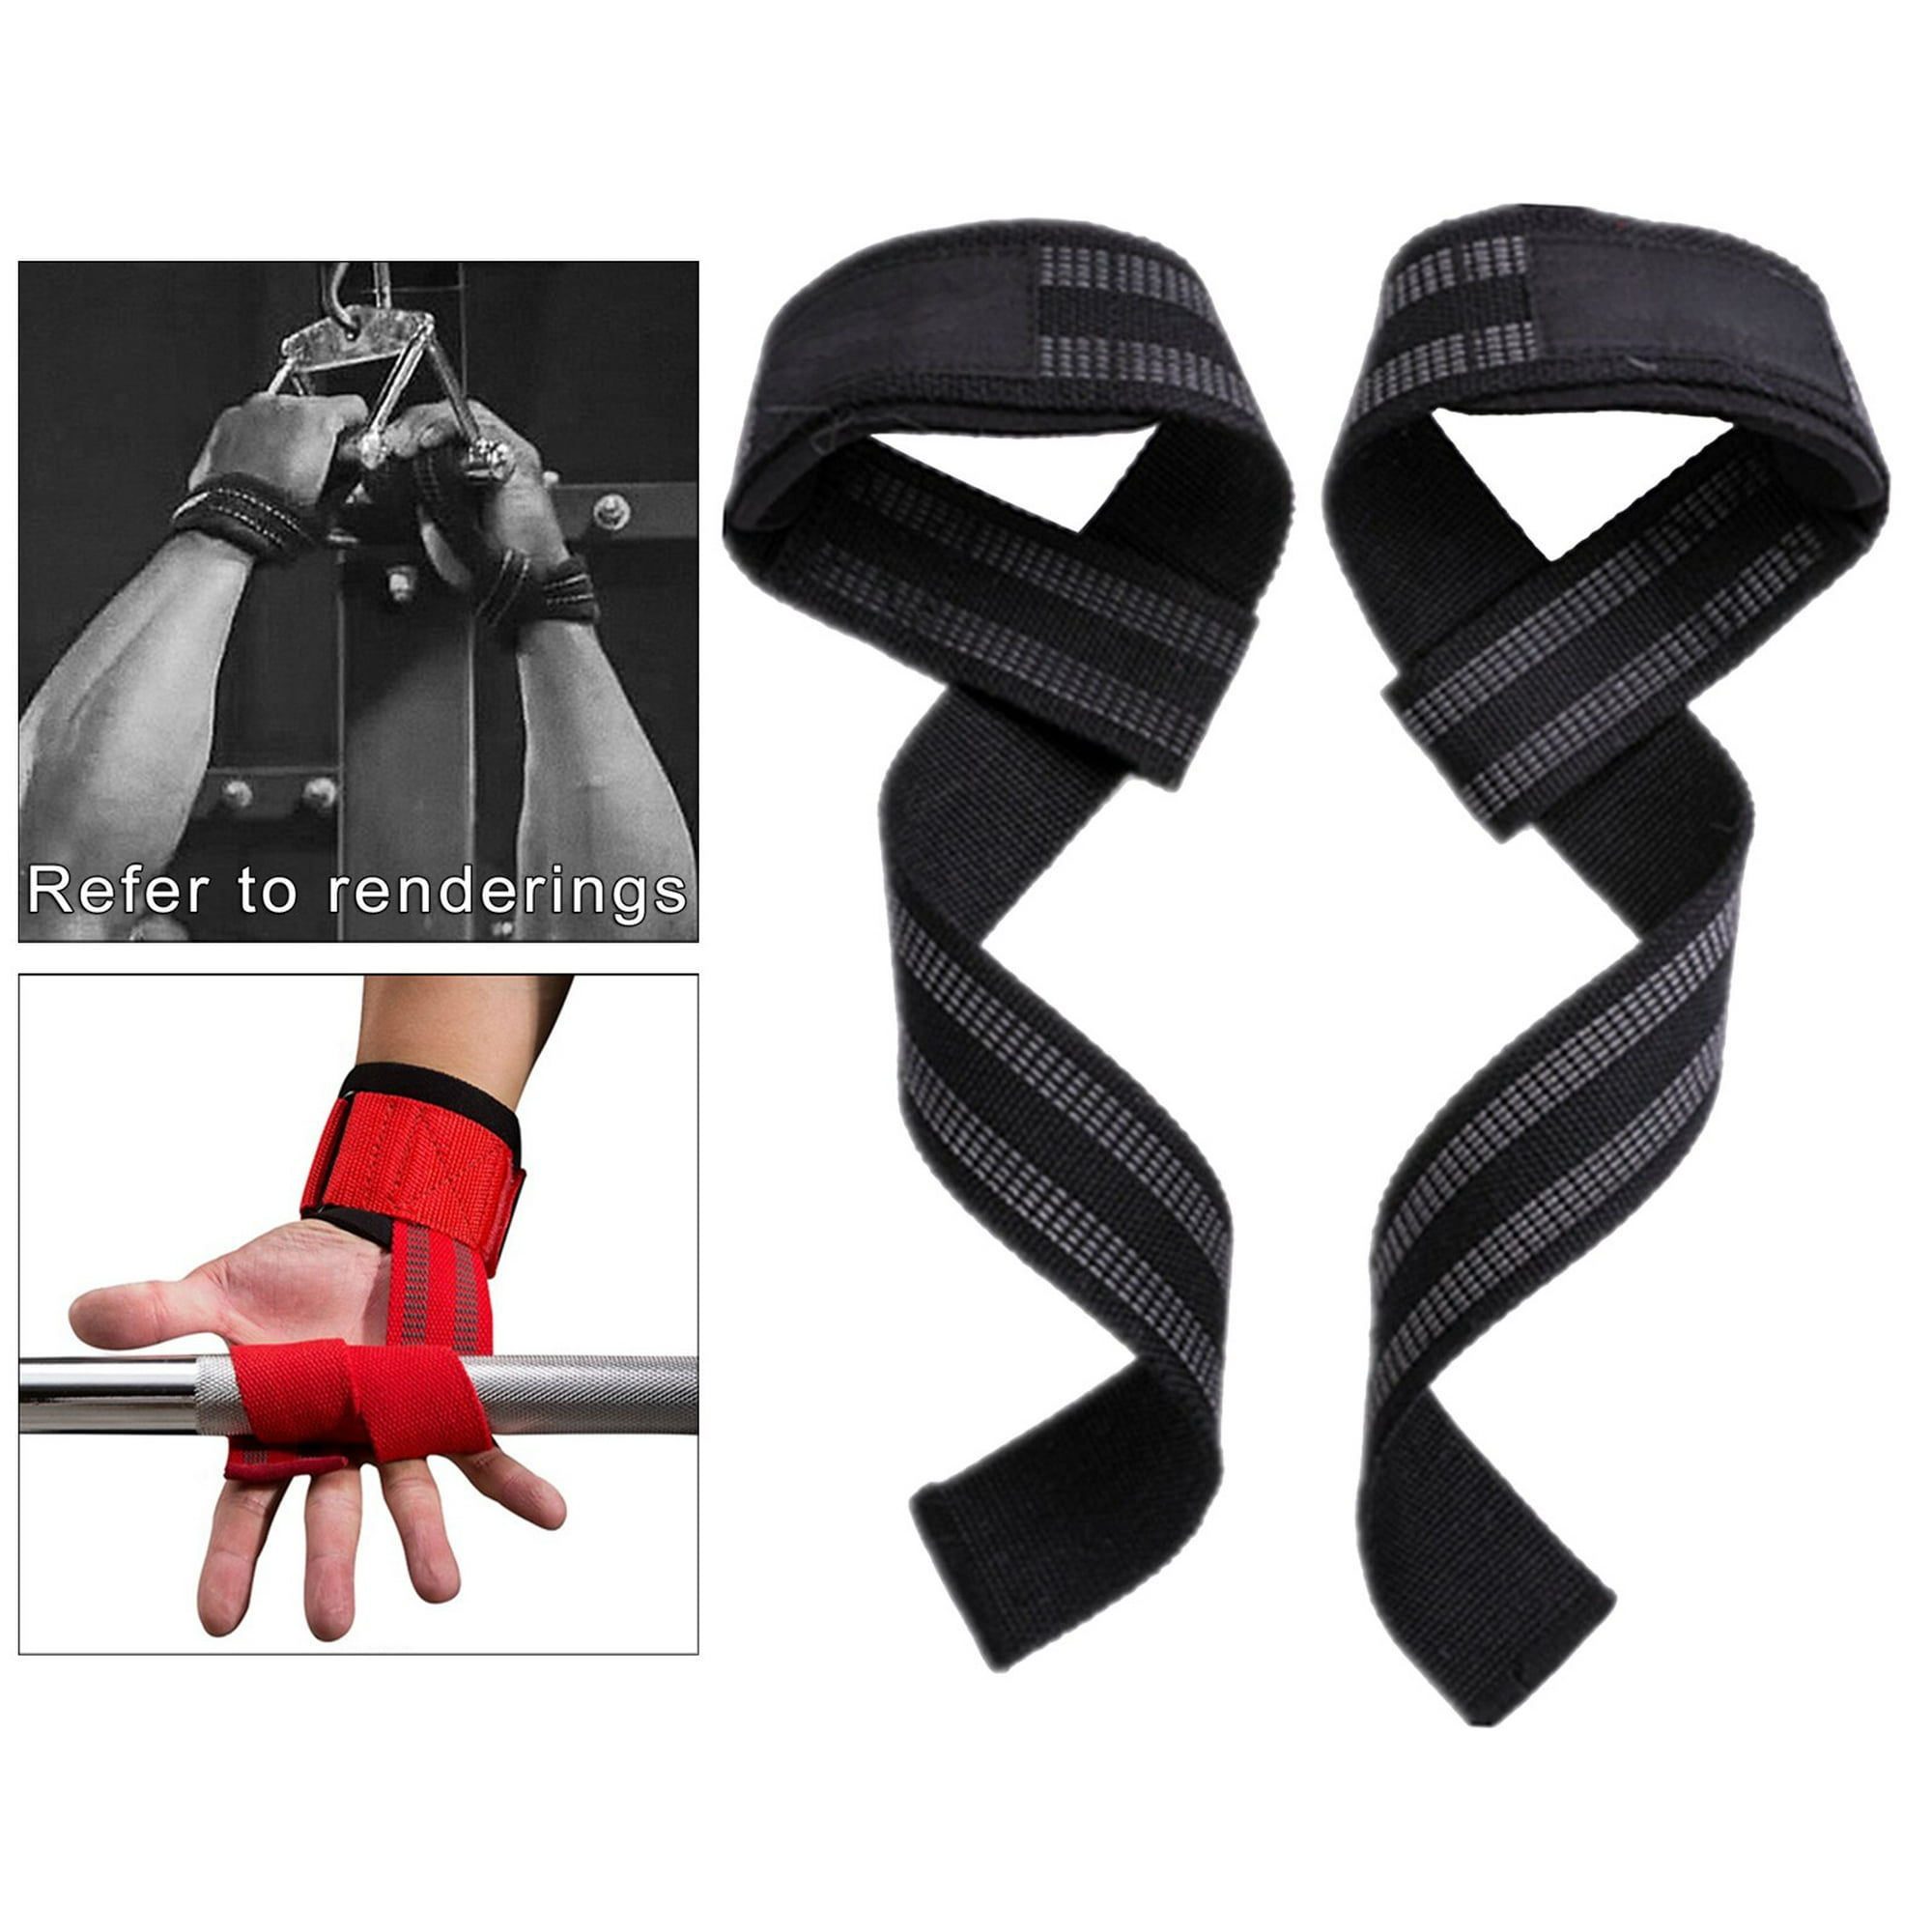 1Pair Weight Lifting Straps Durable Padded Wrist Support Wraps Powerlifting  Strength Deadlift Home Gym Adjustable Unisex He Qiyong unisex